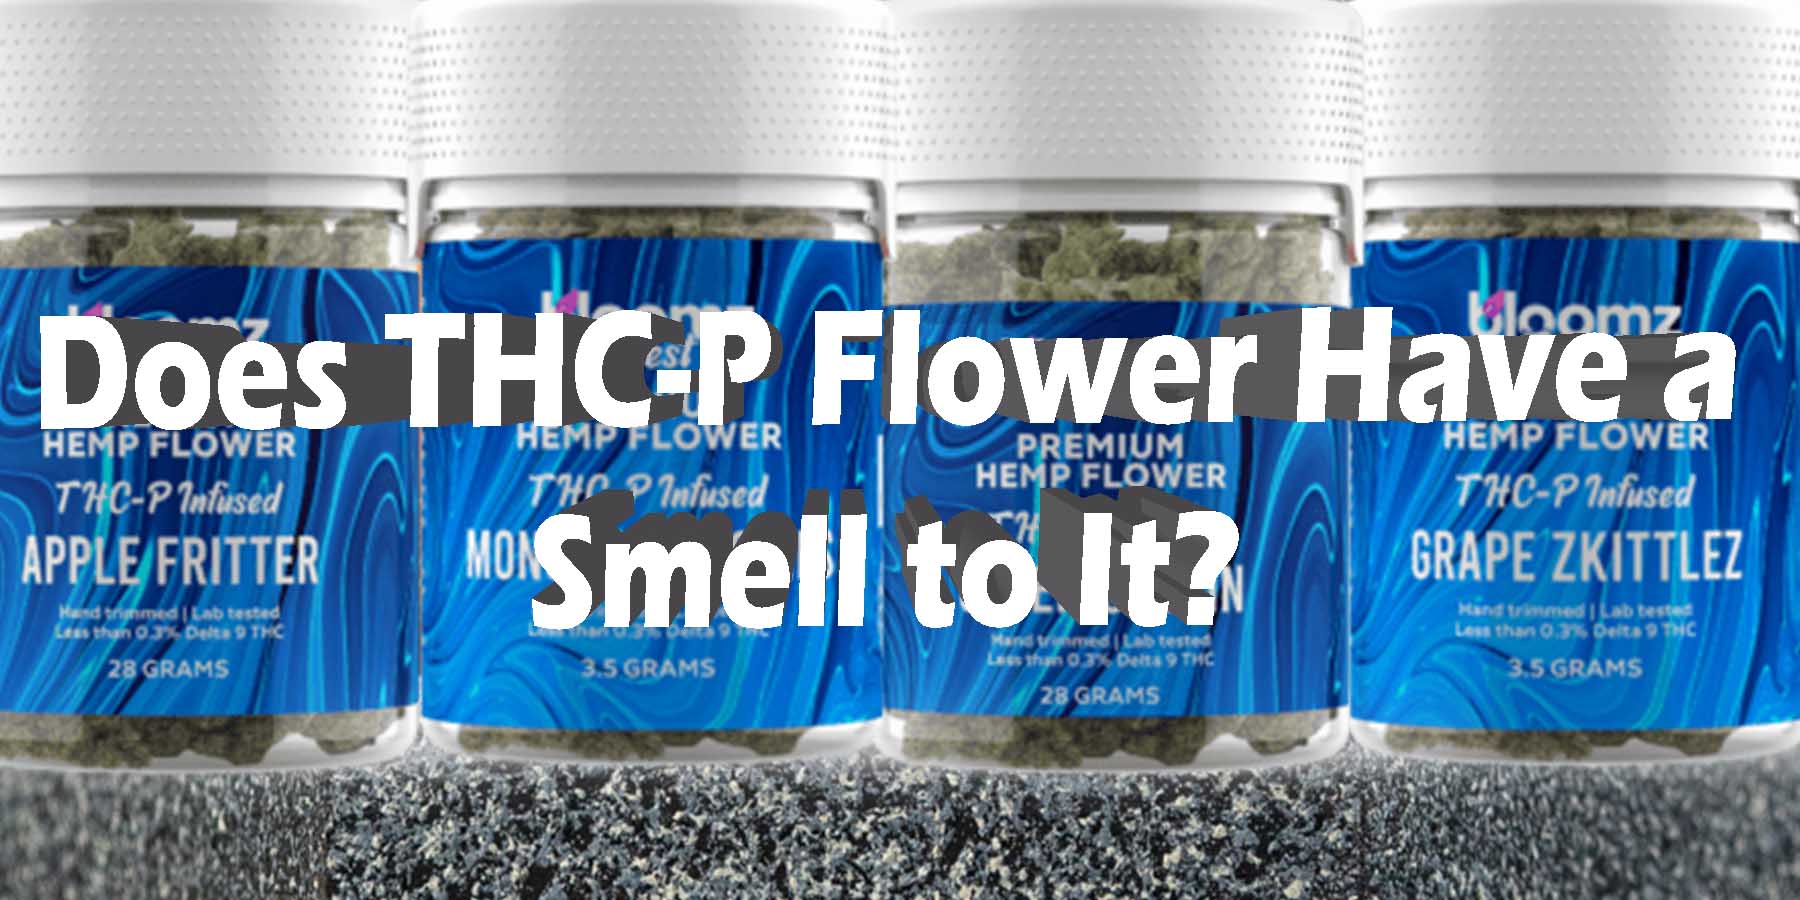 Does THC-P Flower Have a Smell to It HowToGetNearMe BestPlace LowestPrice Coupon Discount For Smoking High Smoke Shop Online Near Me Strongest Binoid